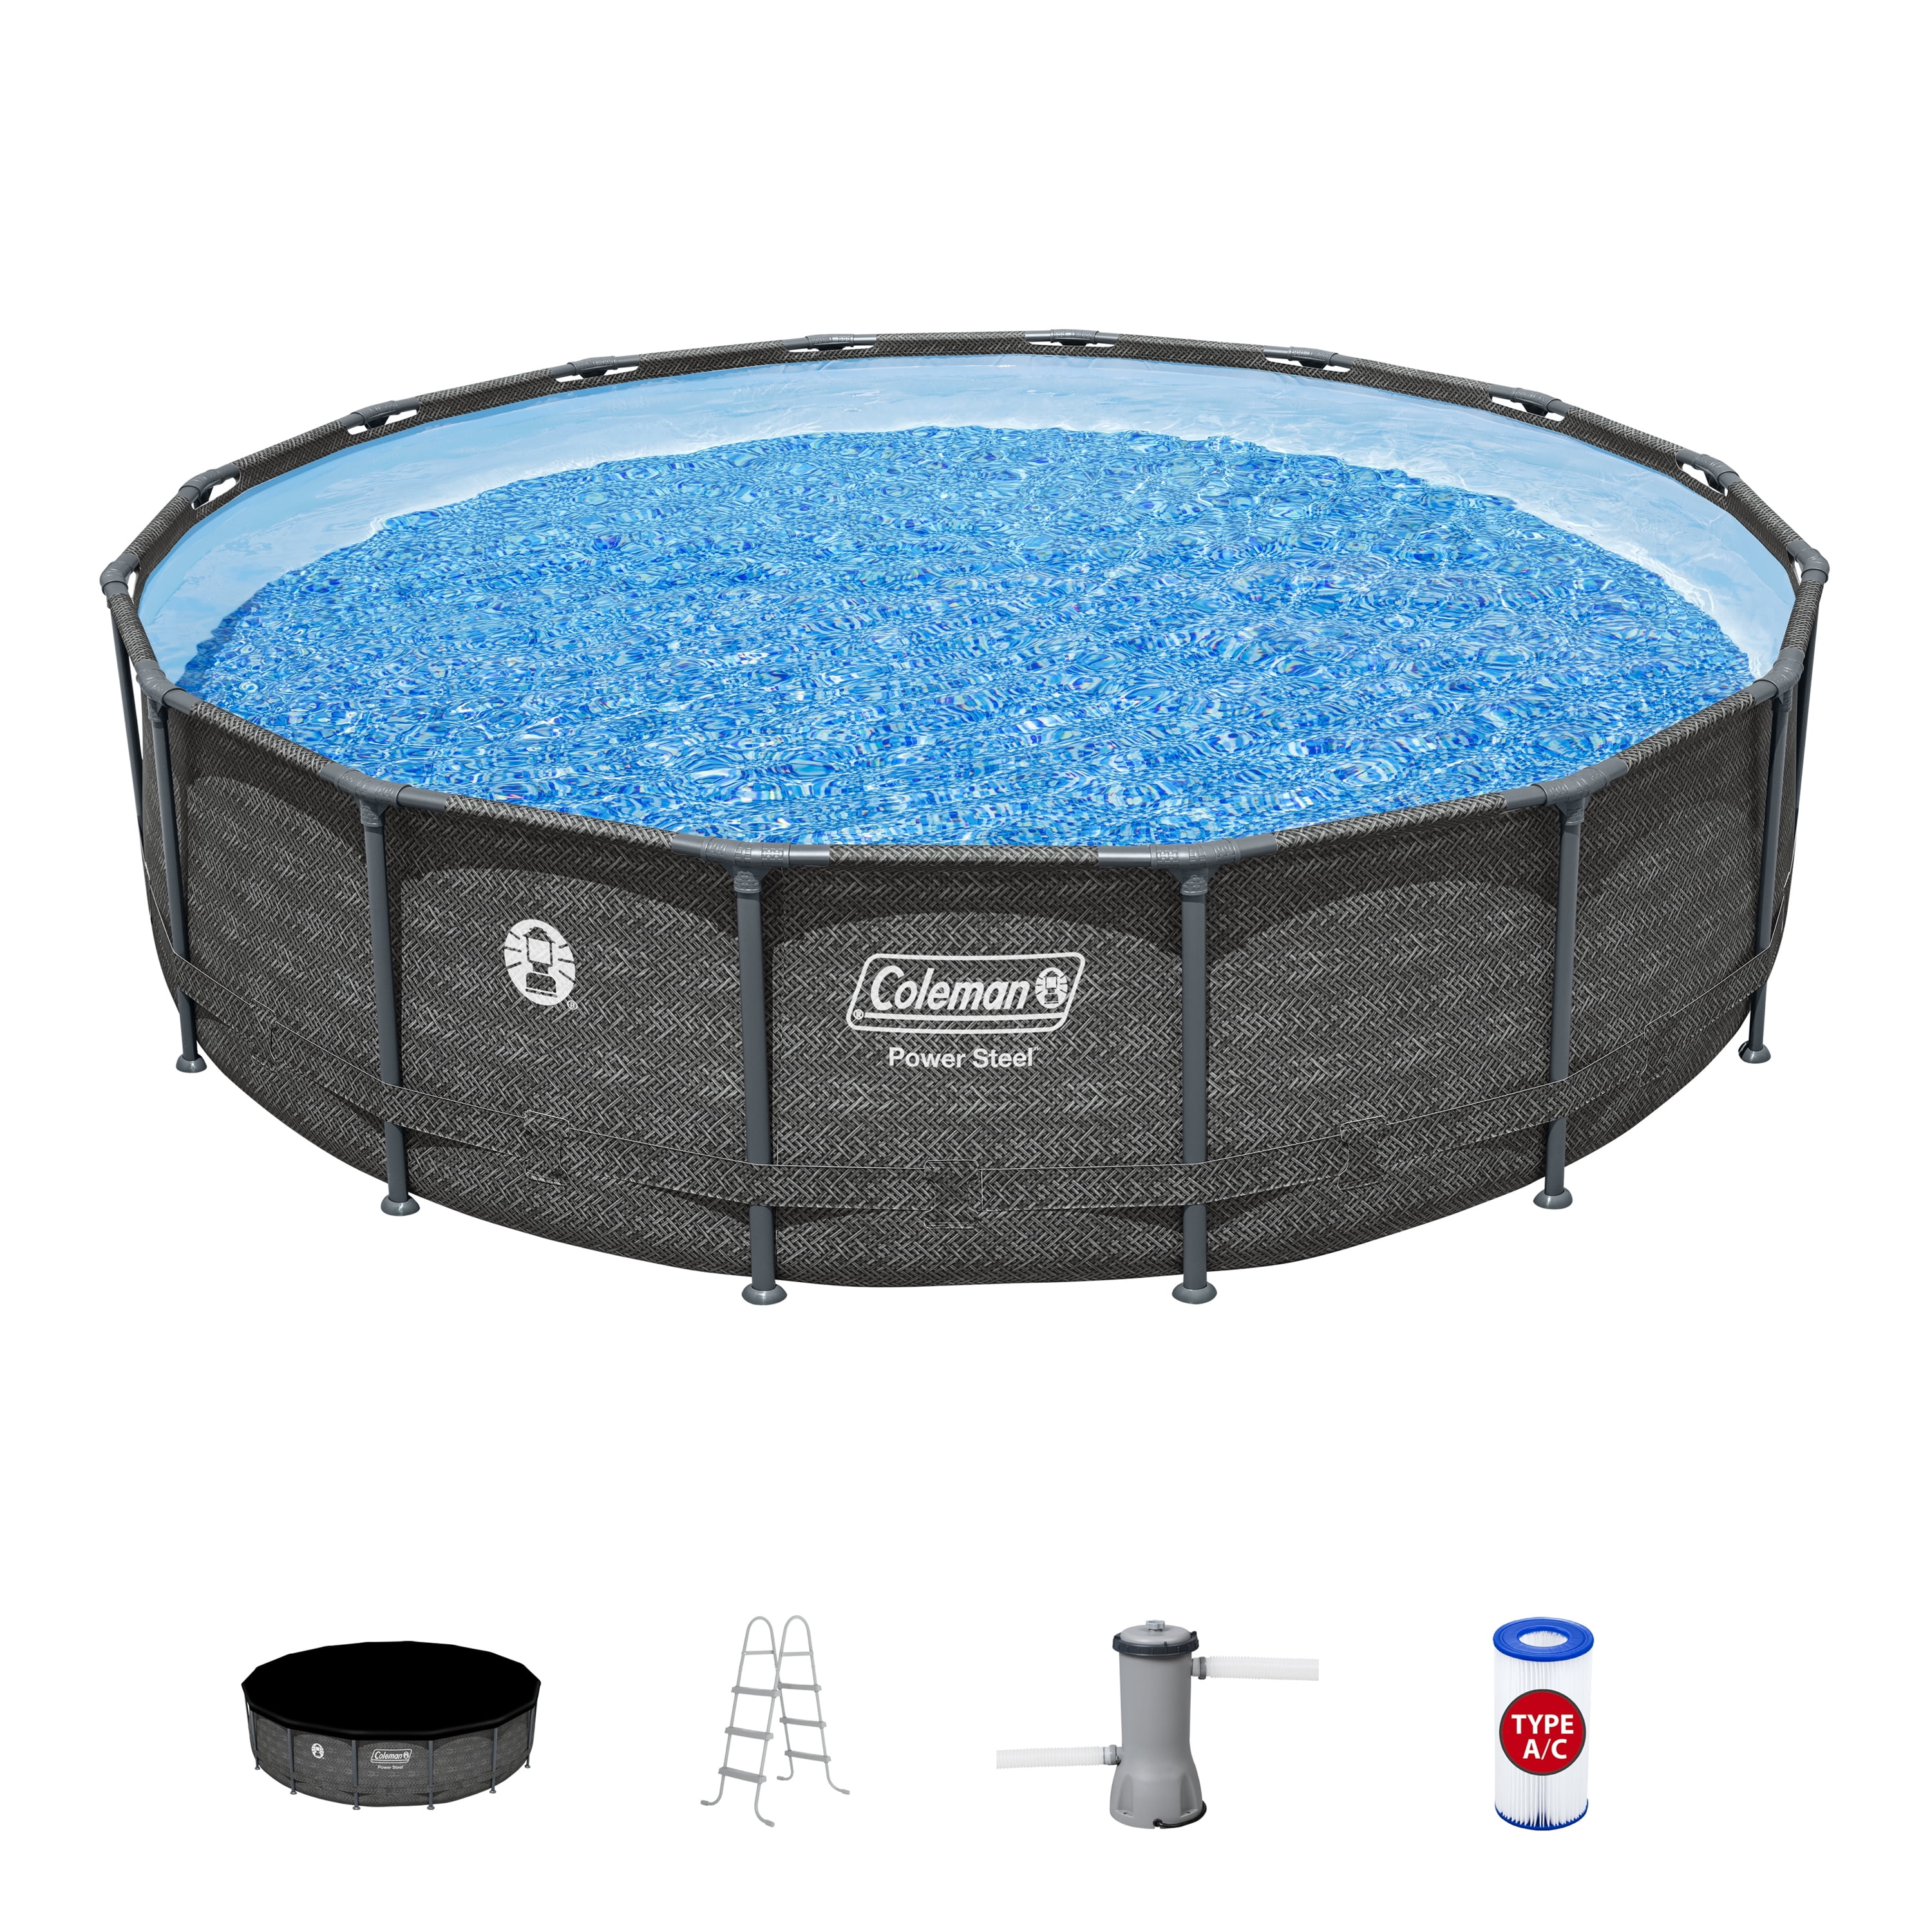 Coleman Power Steel 16 ft. x 42 in. Round Above Ground Pool Set